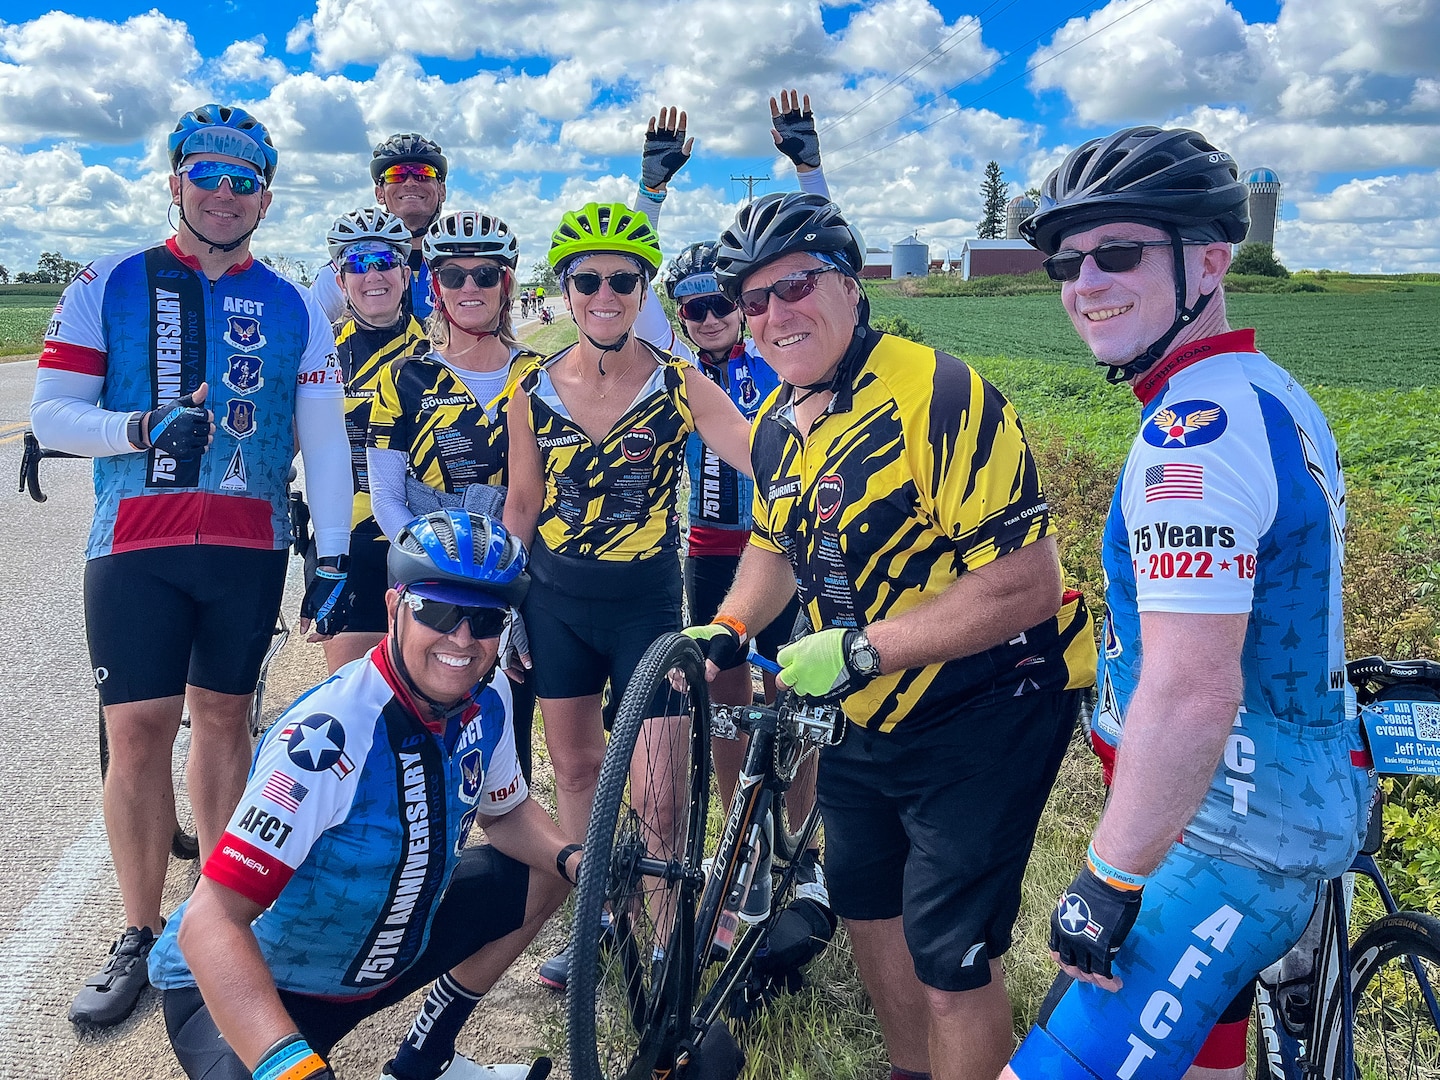 group of cyclist pose for a photo on the side of the road